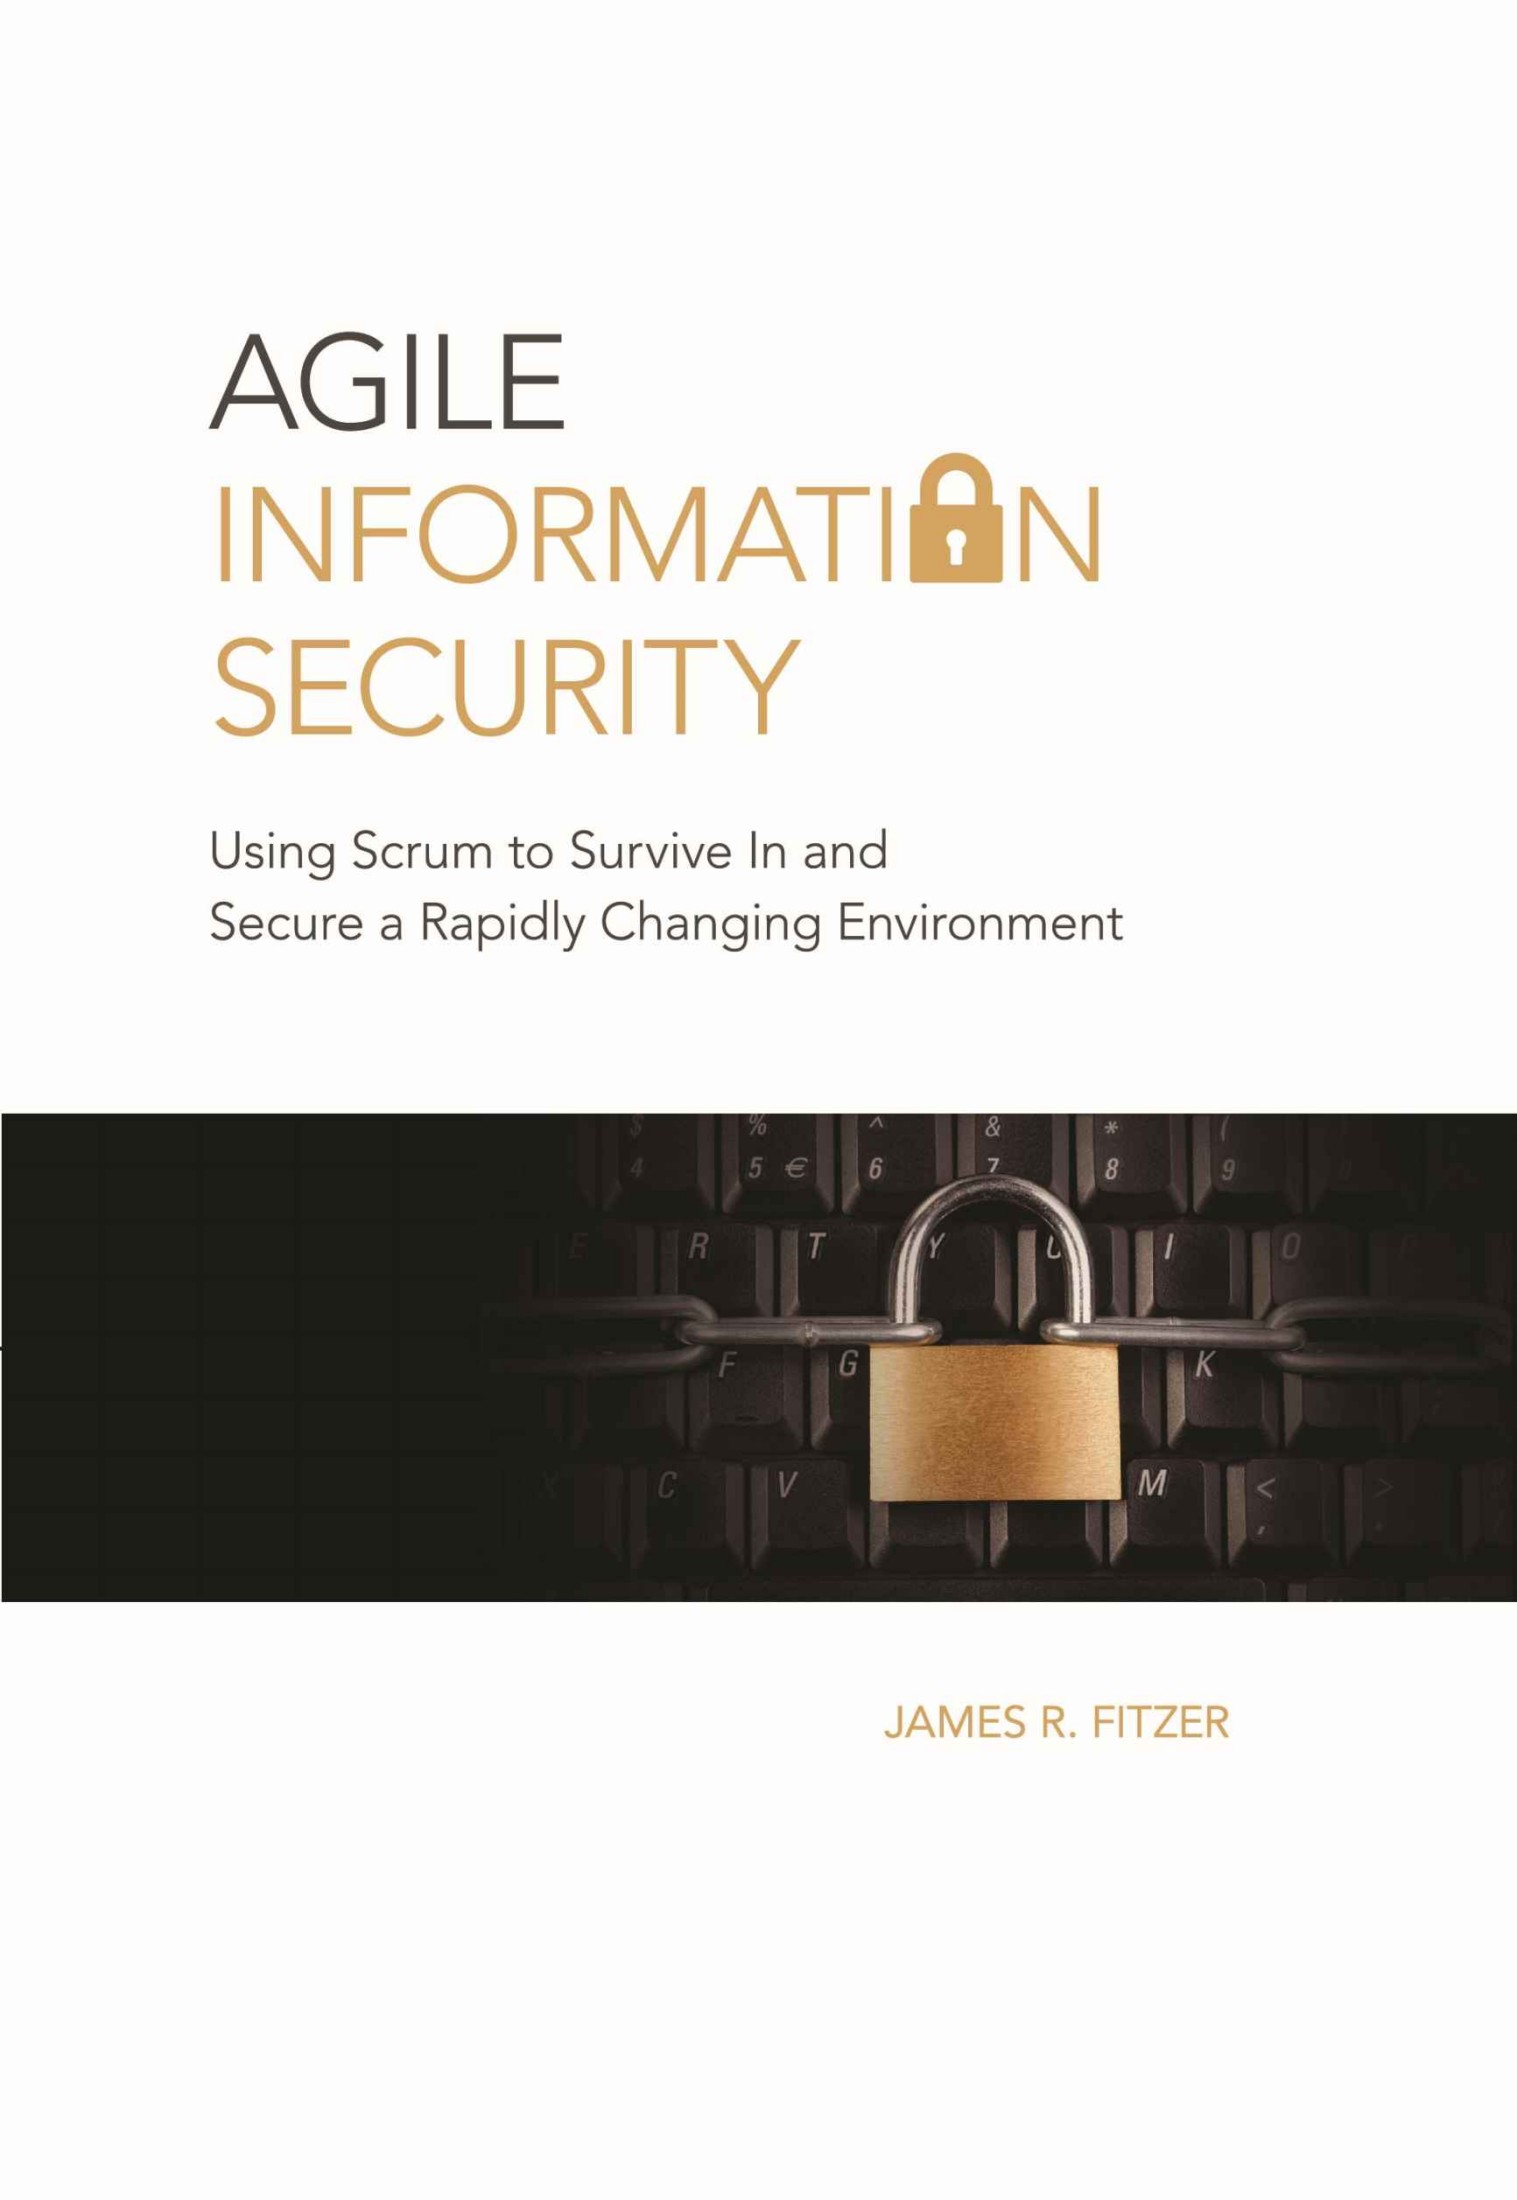 Agile Information Security: Using Scrum to Survive in and Secure a Rapidly Changing Environment